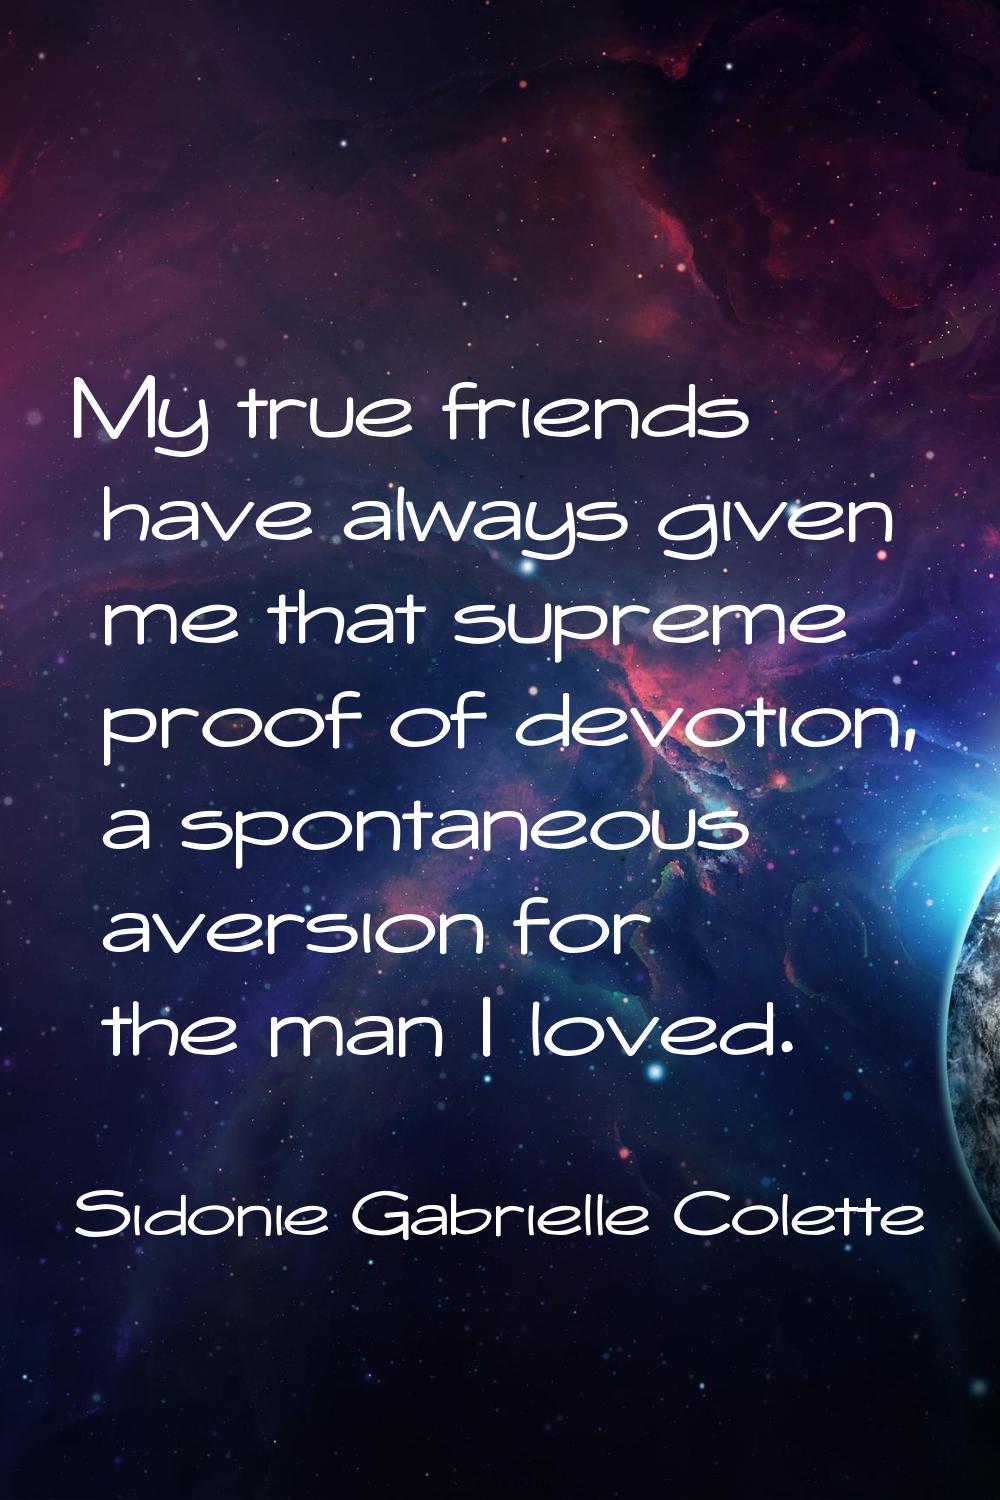 My true friends have always given me that supreme proof of devotion, a spontaneous aversion for the